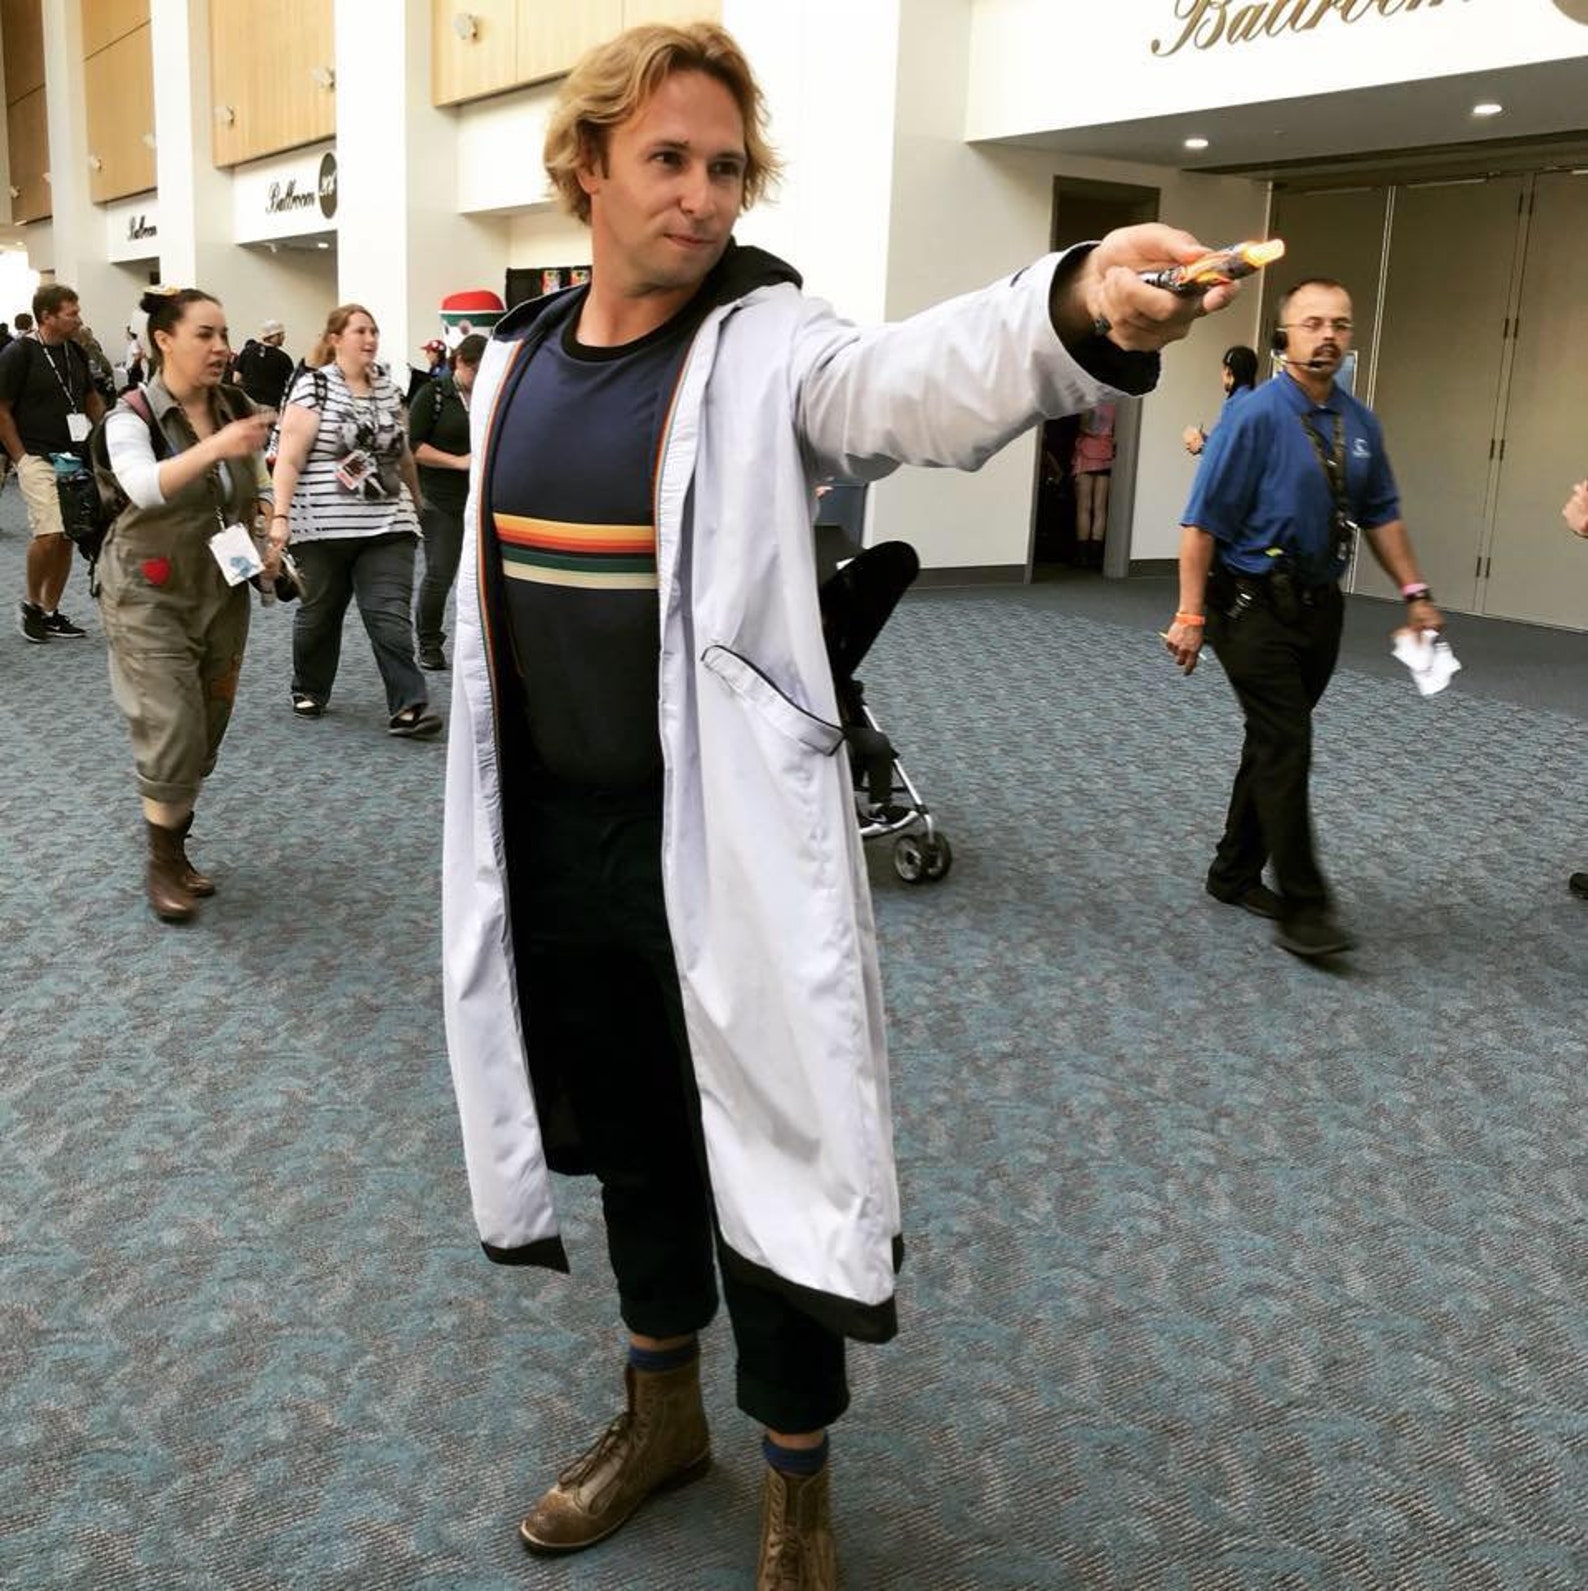 13th doctor who cosplay